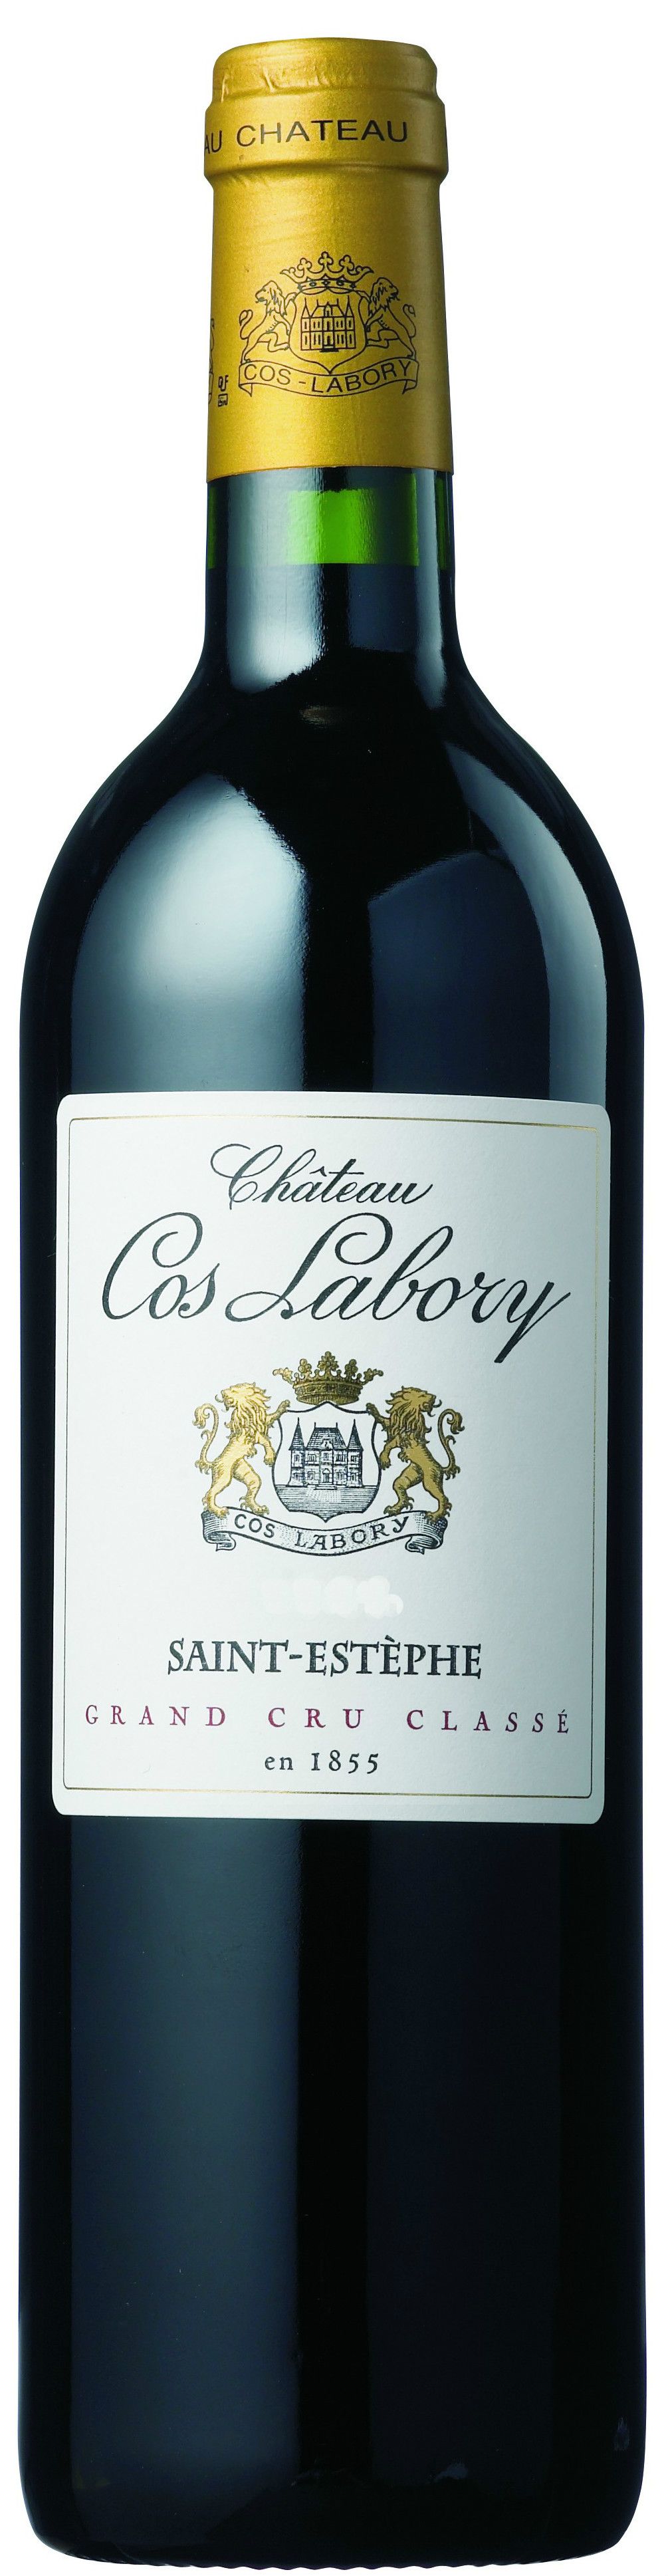 Chateau Cos Labory, 2016